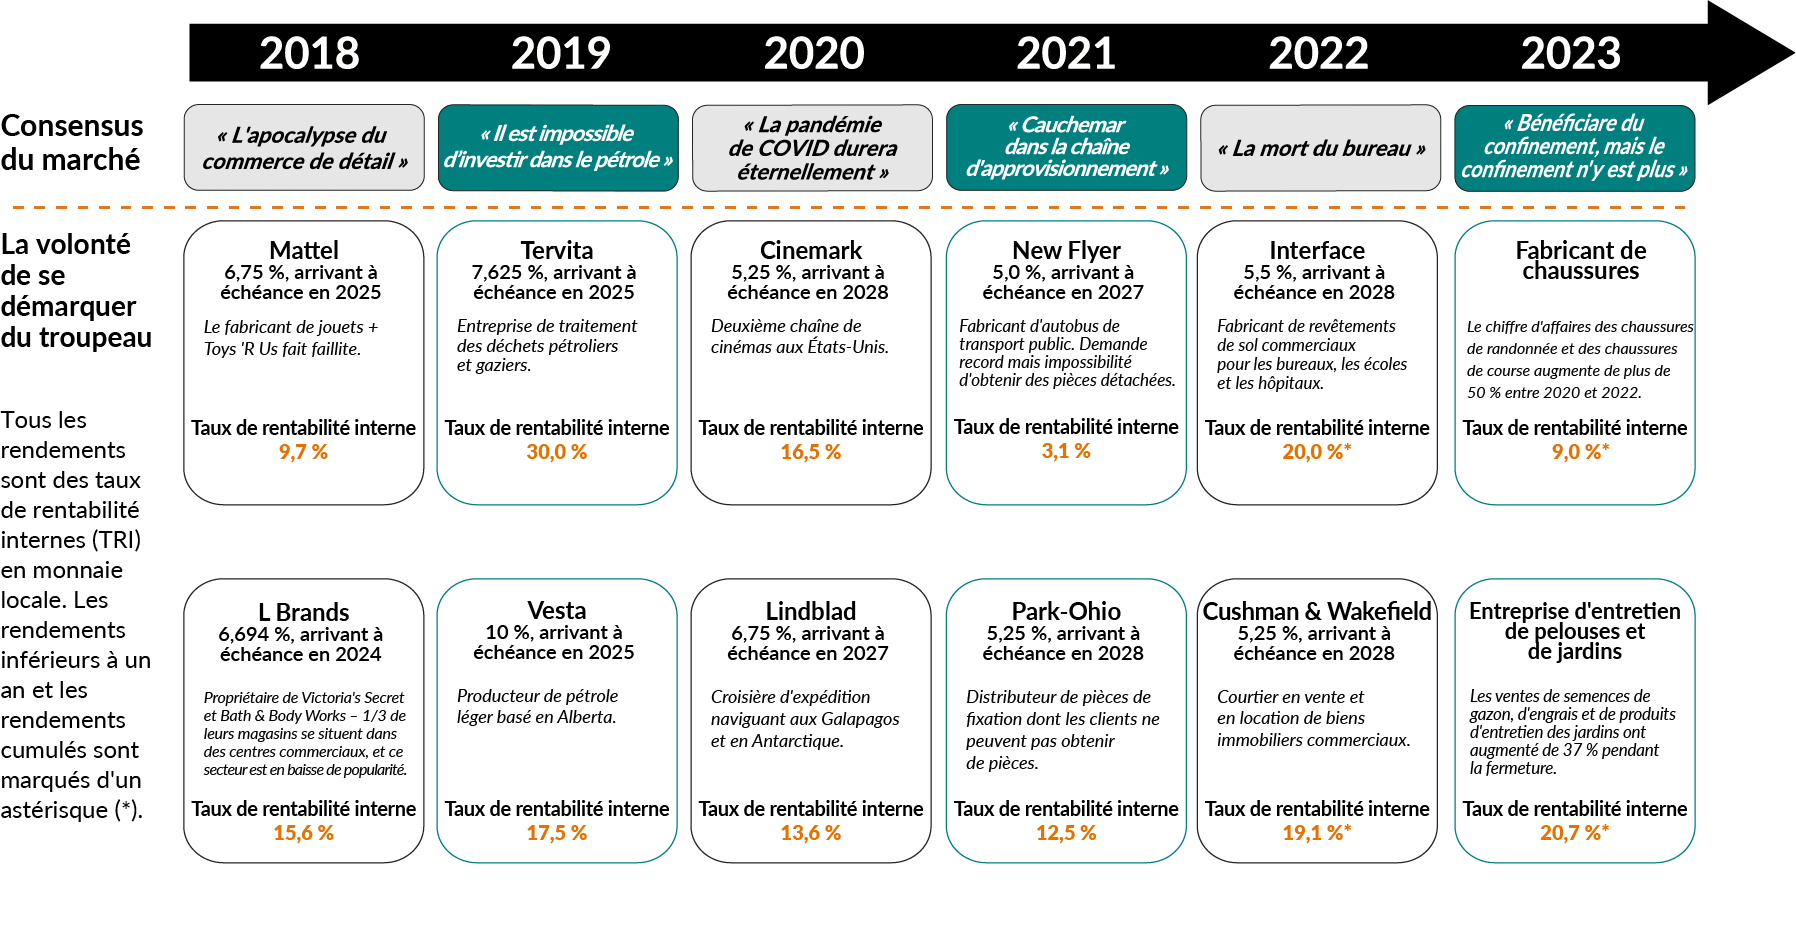 Table - Shows several market-consensus themes that many investors were focused on between 2018 and 2023, contrasted against some of the holdings in EdgePoint's prospectus-exempt portfolio.
 
2018
Market consensus - Retail apocalypse
Mattel 6.75%, due 2025 - Toy manufacturer + Toys'R Us goes broke - Internal rate of return: 9.7%
L Brands 6.694%, due 2024 - Owner of Victoria’s Secret and Bath & Body Works and 1/3rd stores at mall, and no one’s at the mall. -Internal rate of return 15.6%.

2019
Market consensus - Oil is uninvestible
Tervita - 7.625%, due 2025 - Oil & gas waste processing company. - Internal rate of return: 30.0%
Vesta - 10%, due 2025 - Alberta-based, light-oil producer. - Internal rate of return: 17.5%

2020
Market consensus - COVID forever
Cinemark - 5.25%, due 2028 - Second-largest movie theatre chain in the U.S. - Internal rate of return: 16.5%

2021
Market consensus - Supply-chain nightmare
New Flyer - 5.0%, due 2027 - Public transit bus manufacturer. Record demand but can’t get parts. - Internal rate of return: 3.1%
Park-Ohio - 5.25%, due 2028 - Fastener distributor whose customers can’t get parts. - Internal rate of return: 12.5%

2022
Market consensus - The office is dead
Interface - 5.5%, due 2028 - Commercial flooring manufacturer selling into offices, schools, hospitals. - Internal rate of return: 20.0%*
Cushman & Wakefield - 5.25%, due 2028 - Commercial real estate sales and leasing broker. - Internal rate of return: 19.1%*

2023
Market consensus - Stay at home…but no one’s home
Footwear manufacturer - Hiking boot and running shoe revenue up >50% from 2020 to 2022. - Internal rate of return: 9.7%
Lawn & garden-care company - Sales of lawn seed, fertilizer, garden care up +37% during lockdown. - Internal rate of return: 20.7%